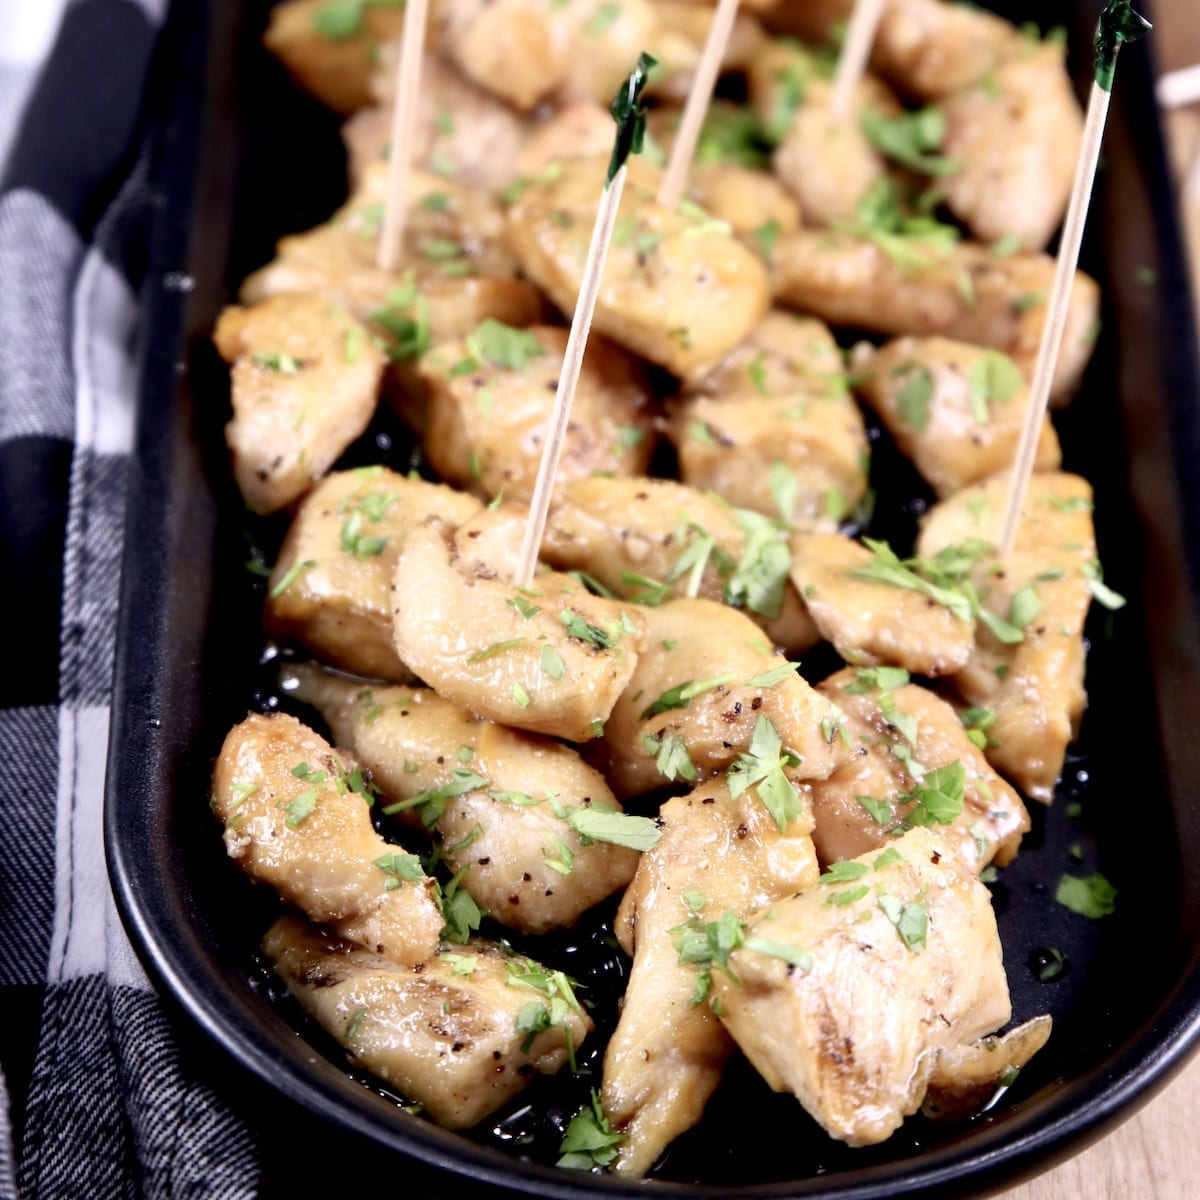 Honey Garlic Chicken Bites on a platter - some with toothpicks for serving